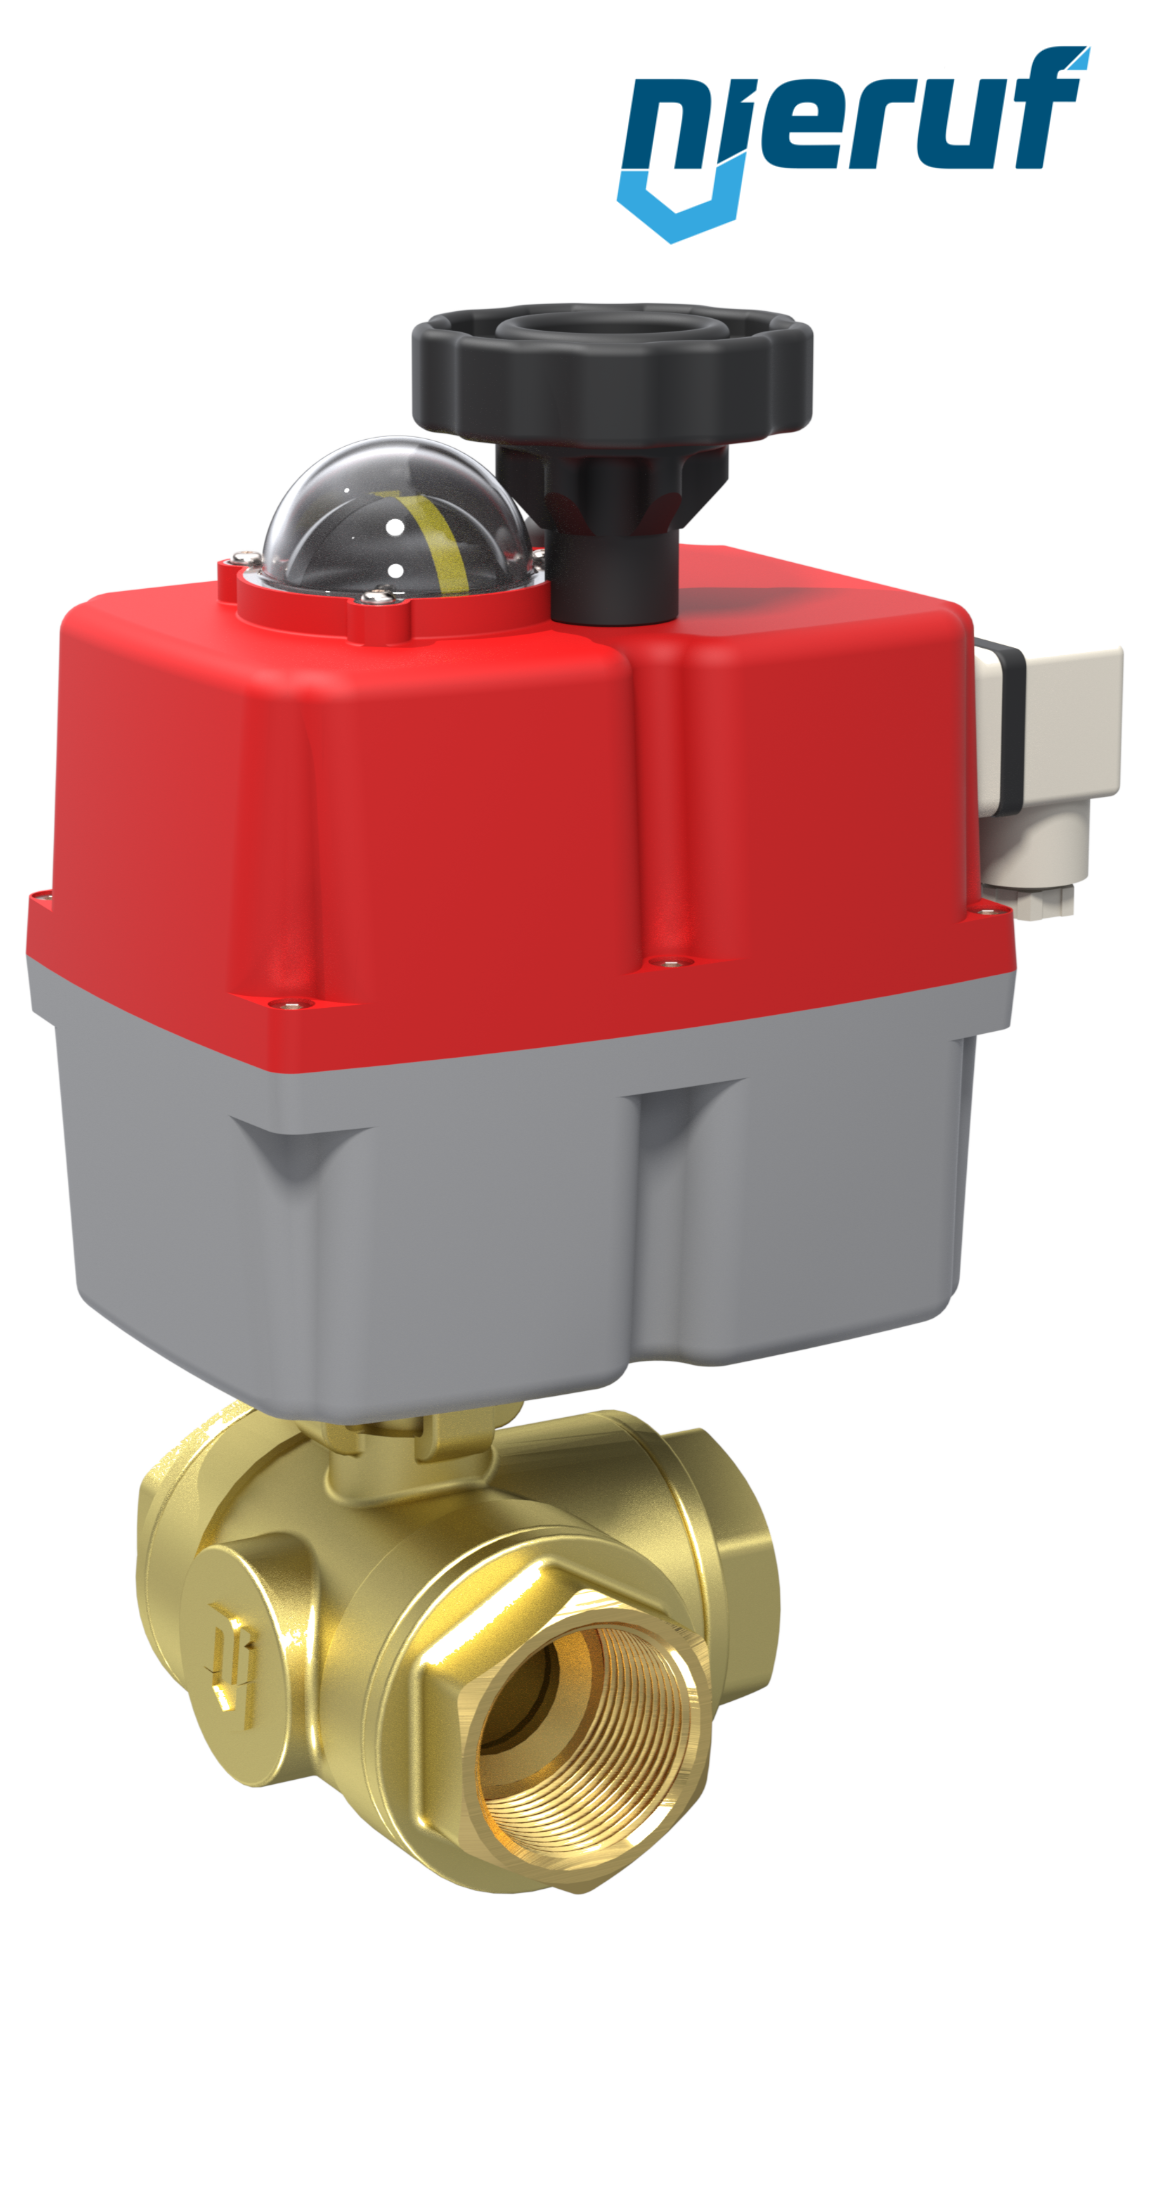 3 way automatic-ball valve 24-240V DN50 - 2" inch brass full port design with T drilling